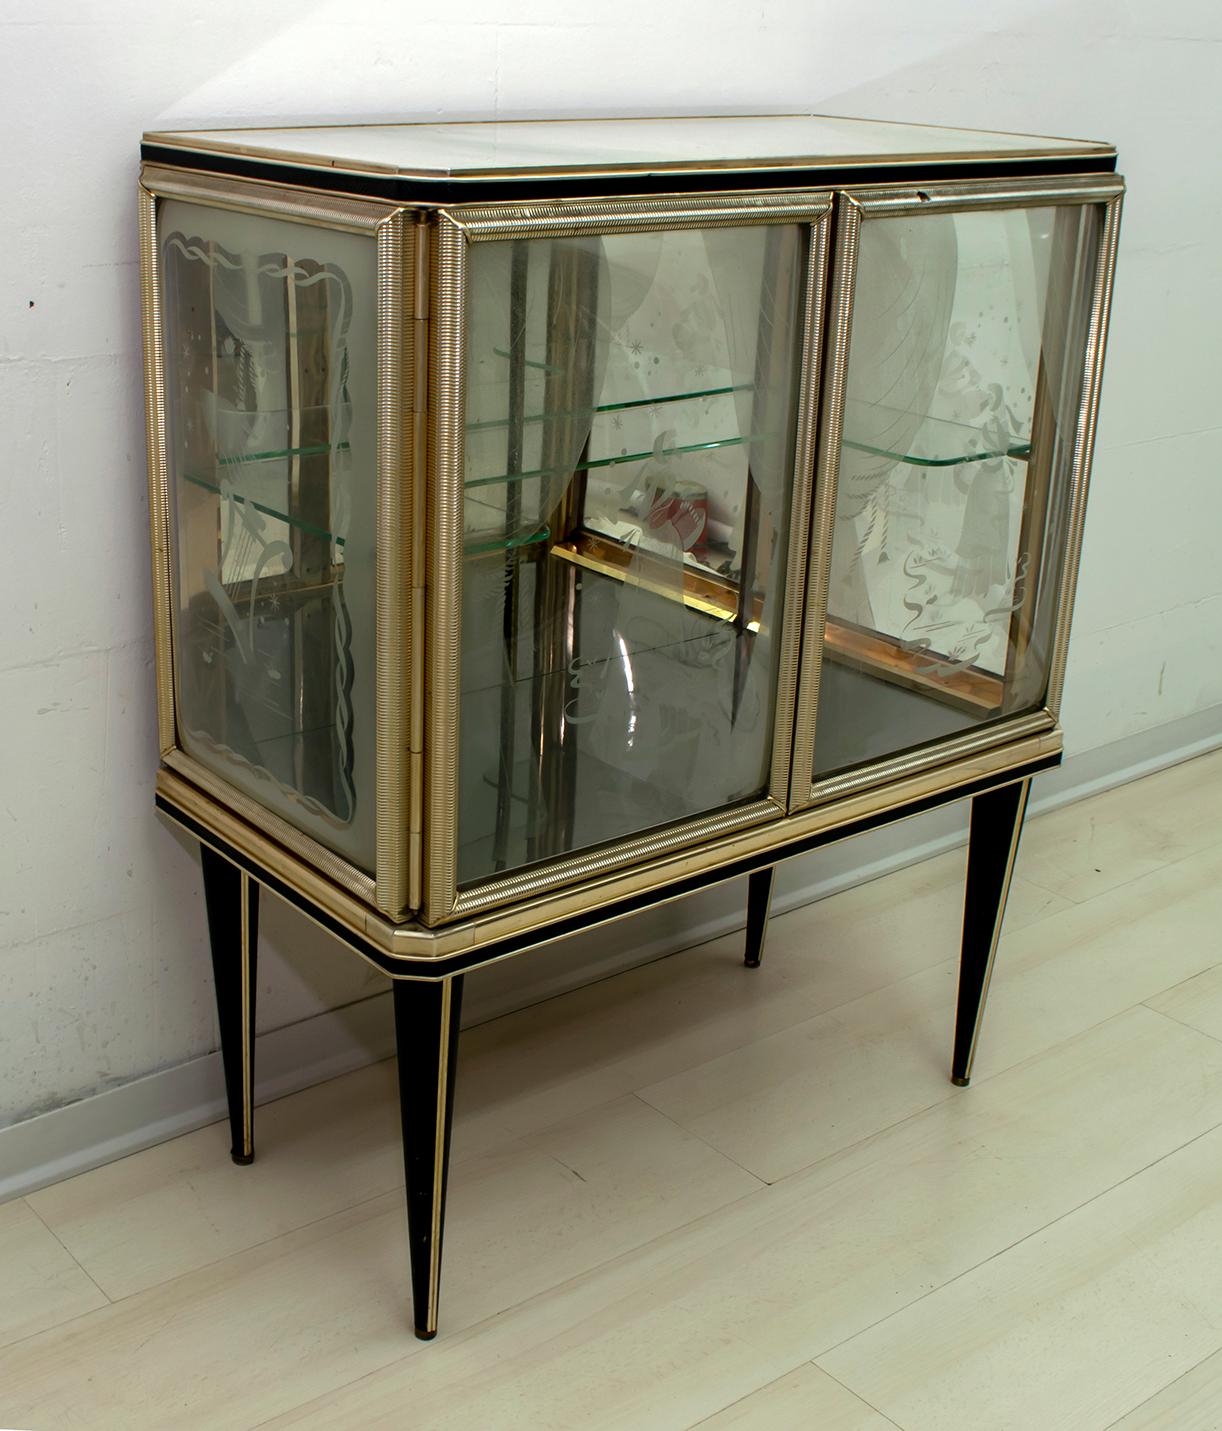 Bar cabinet designed by Umberto Mascagni of Bologna in the 1950s. The main structure is made of solid European wood, covered in cream-colored vinyl with anodized aluminum, decorated sanded convex glasses. Even the legs are covered with black vinyl!